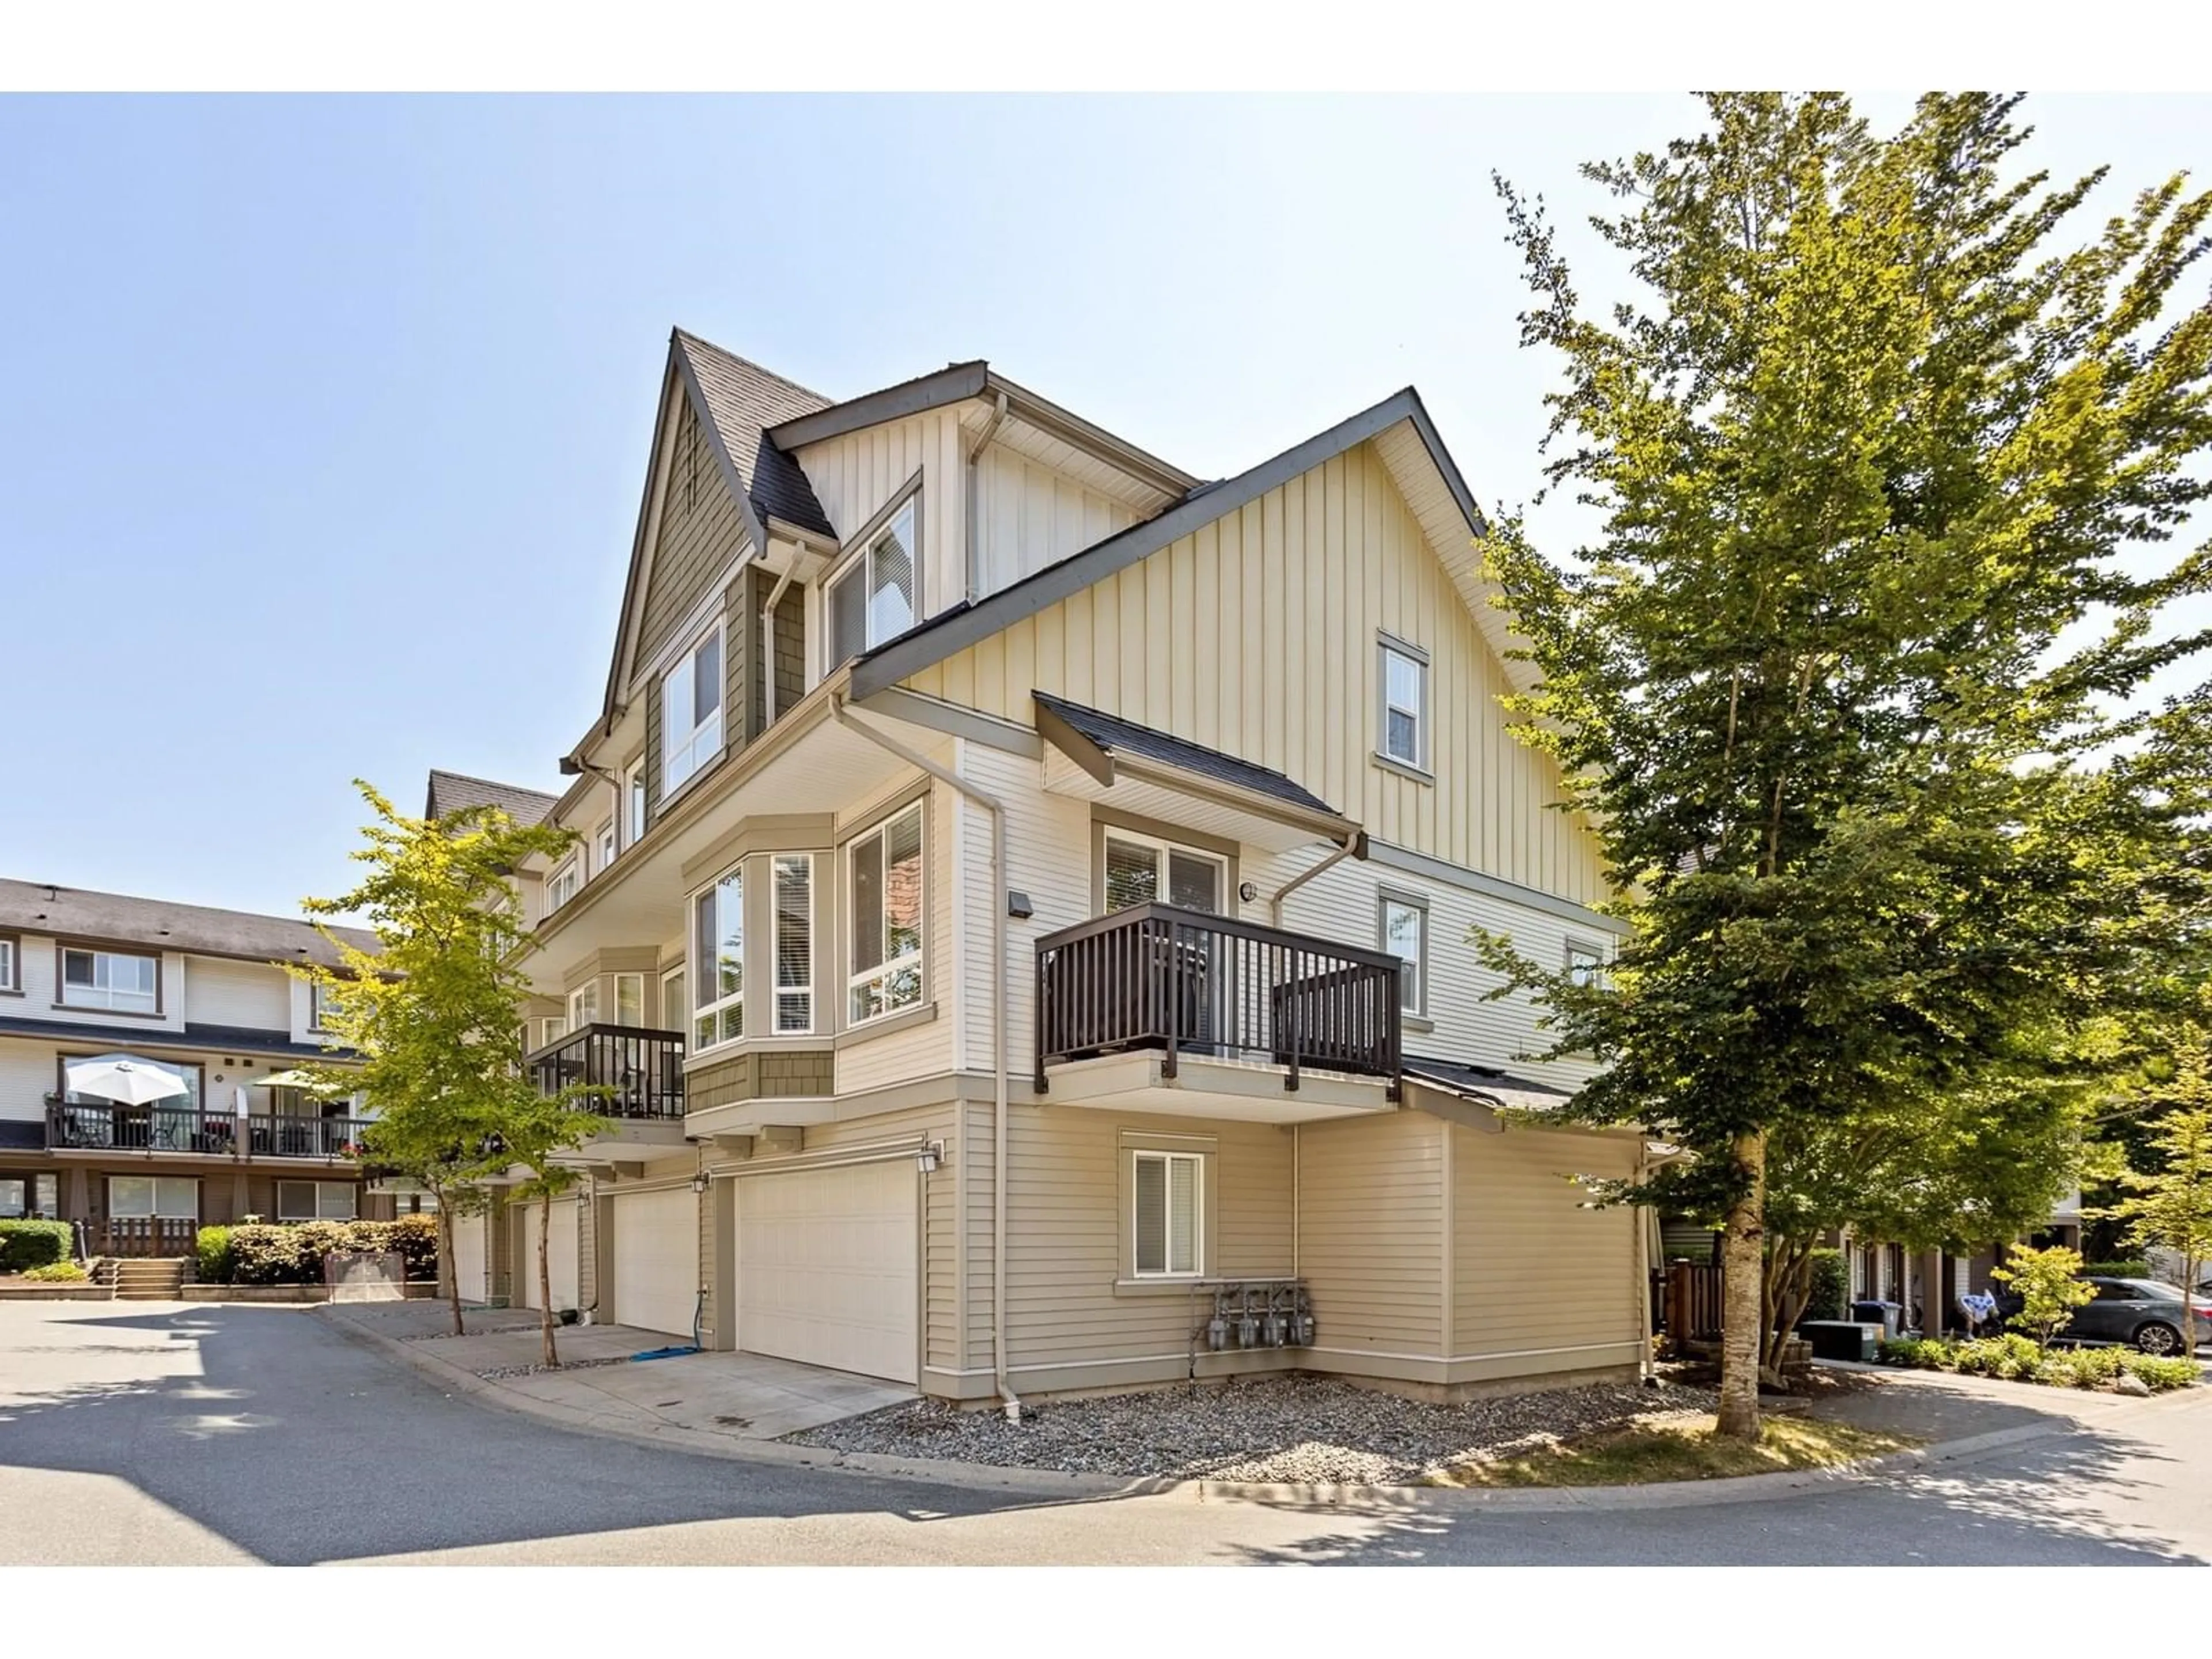 A pic from exterior of the house or condo for 43 7155 189 STREET, Surrey British Columbia V4N5S8